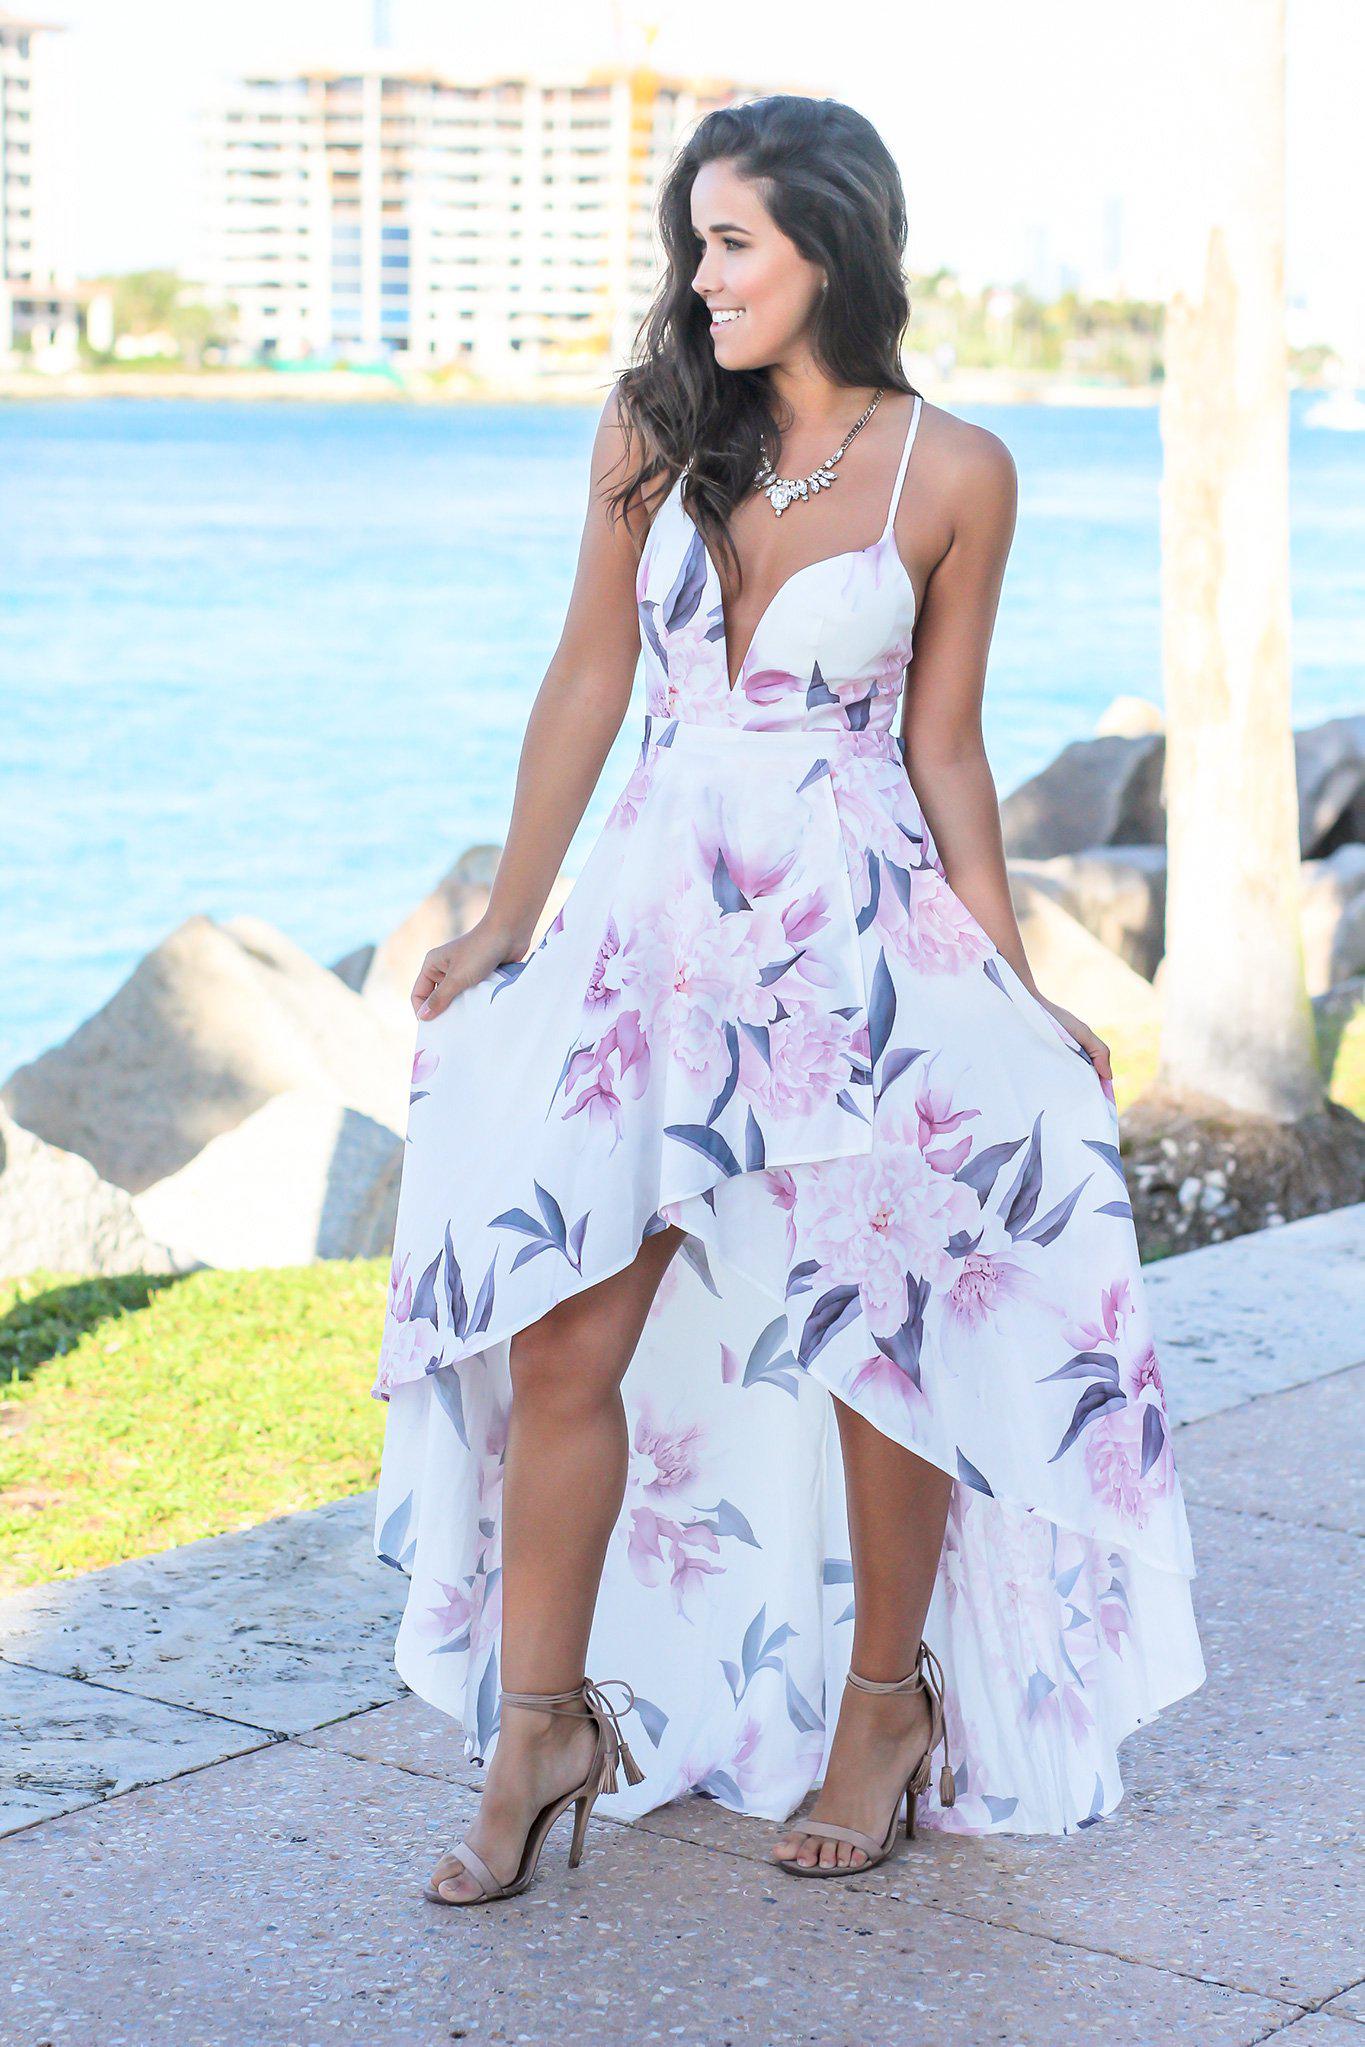 white floral high low dress